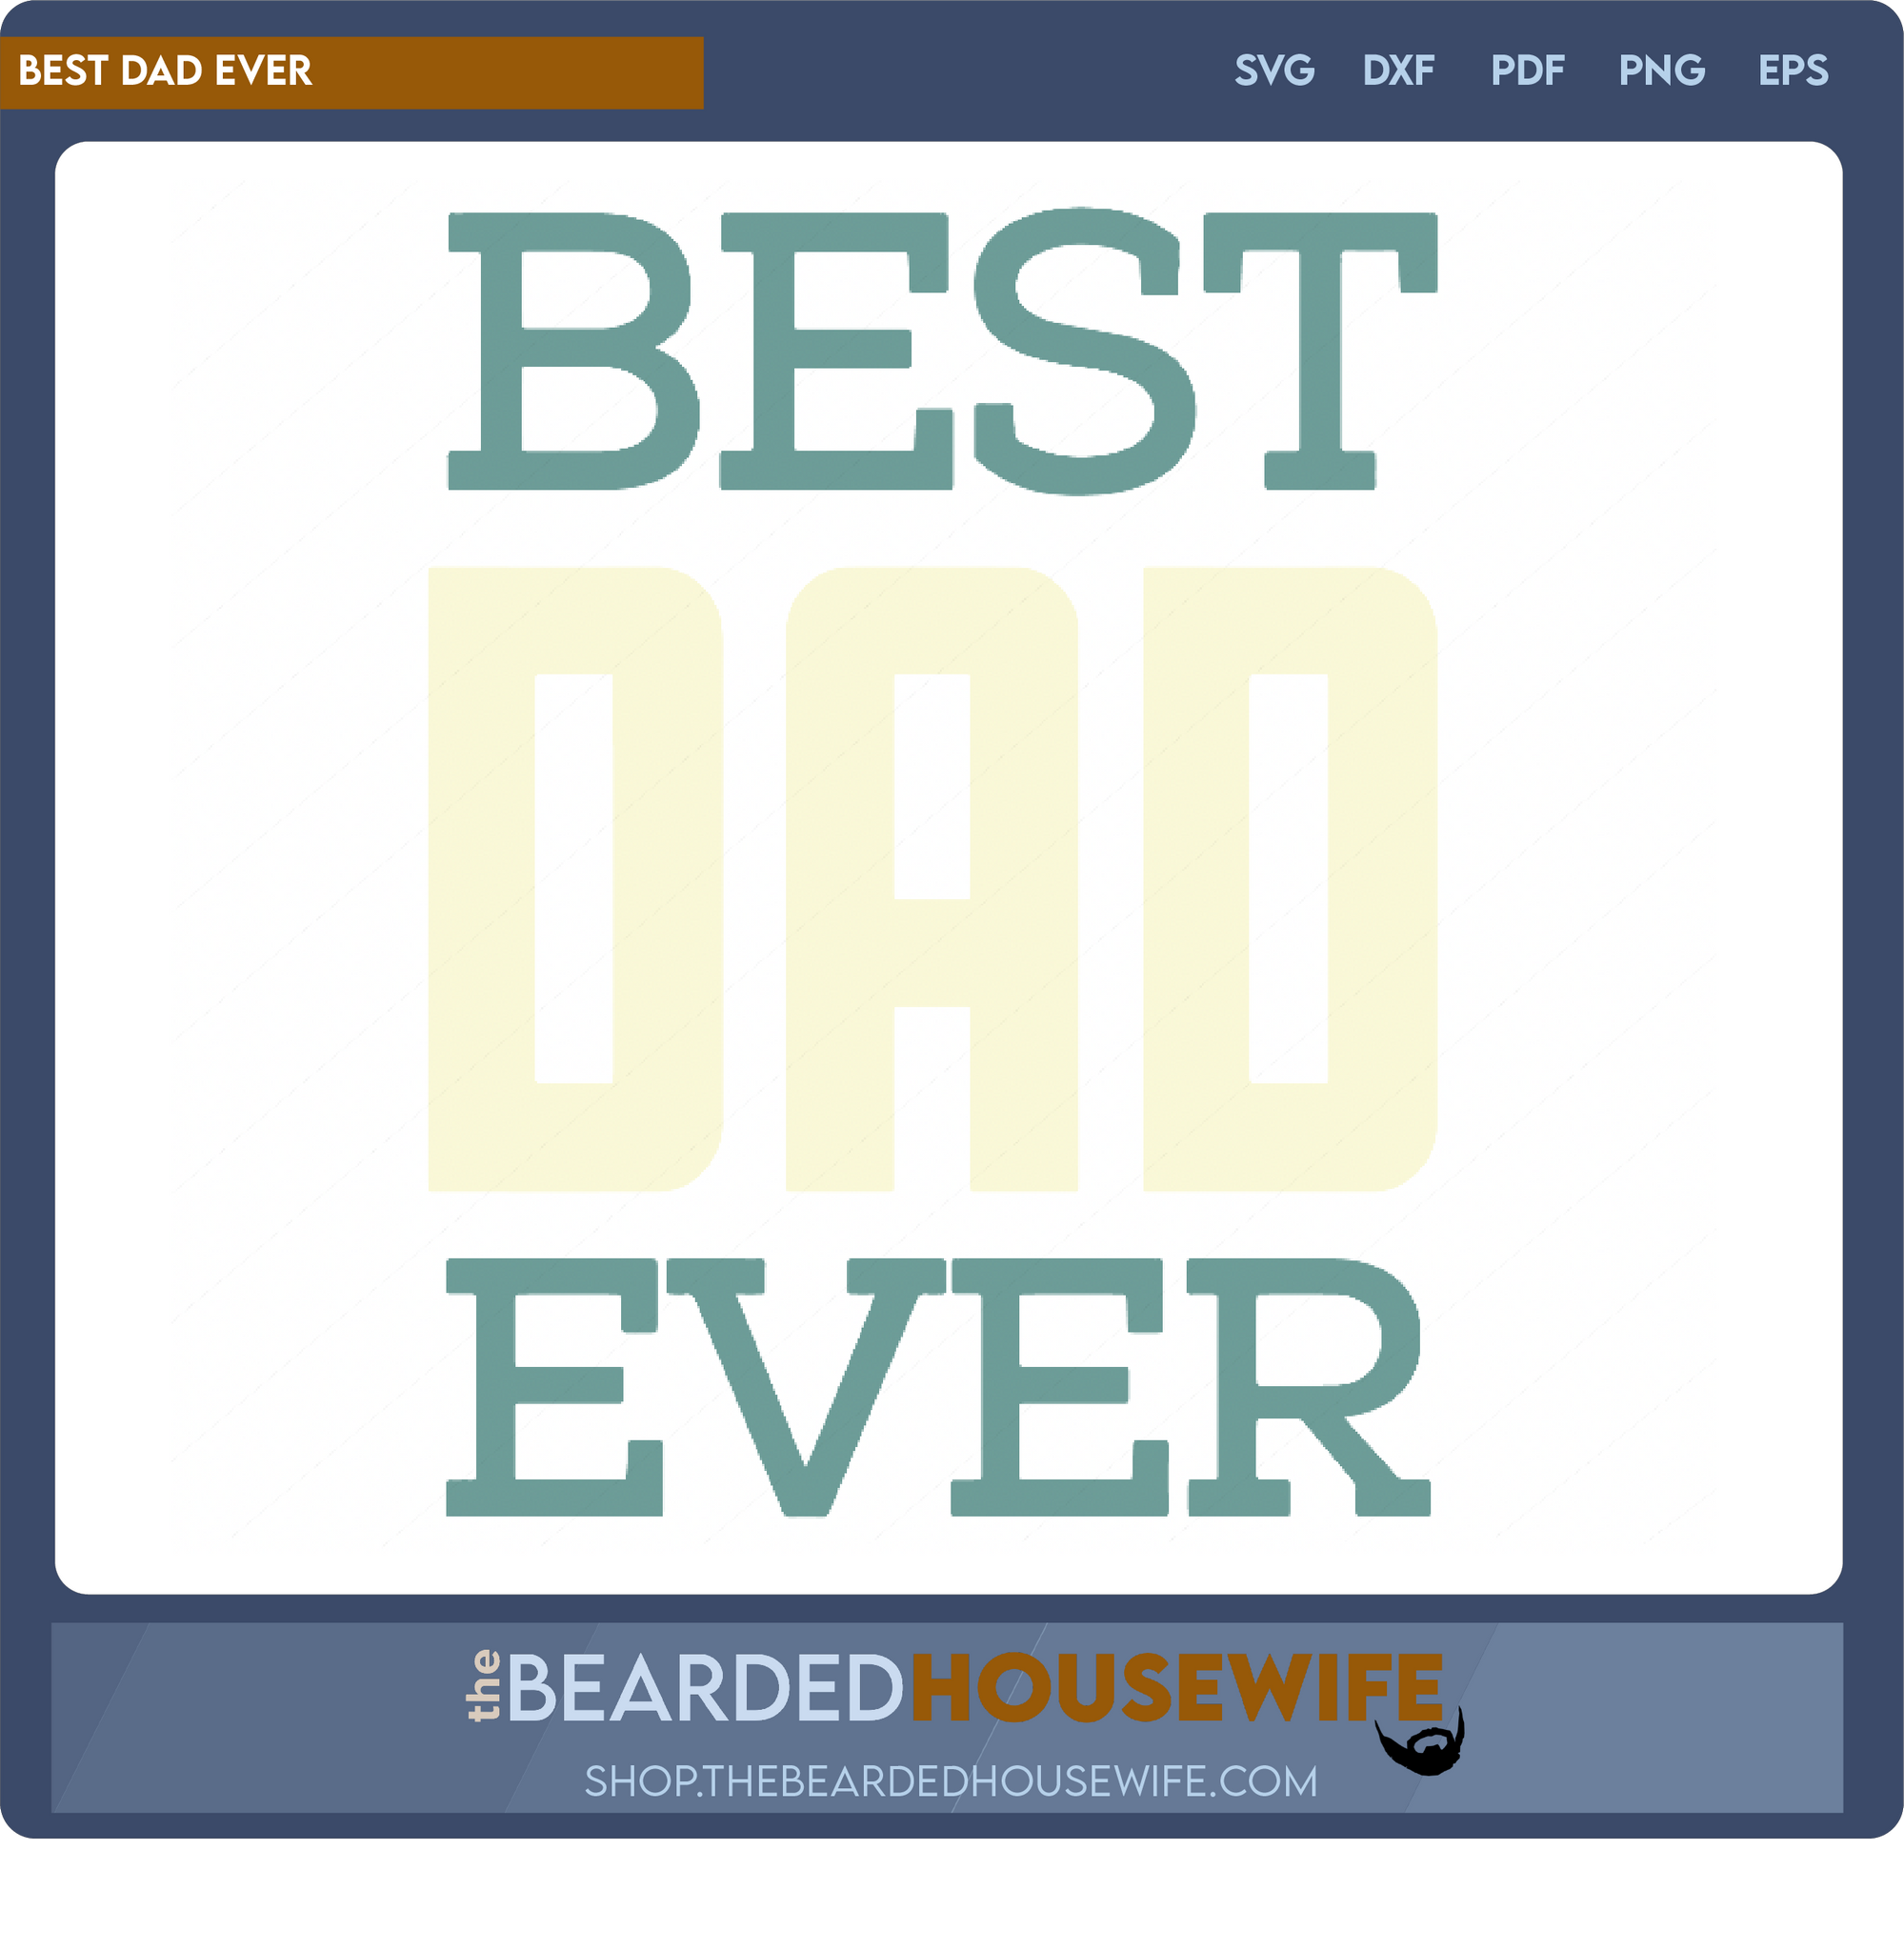 best dad ever - the bearded housewife